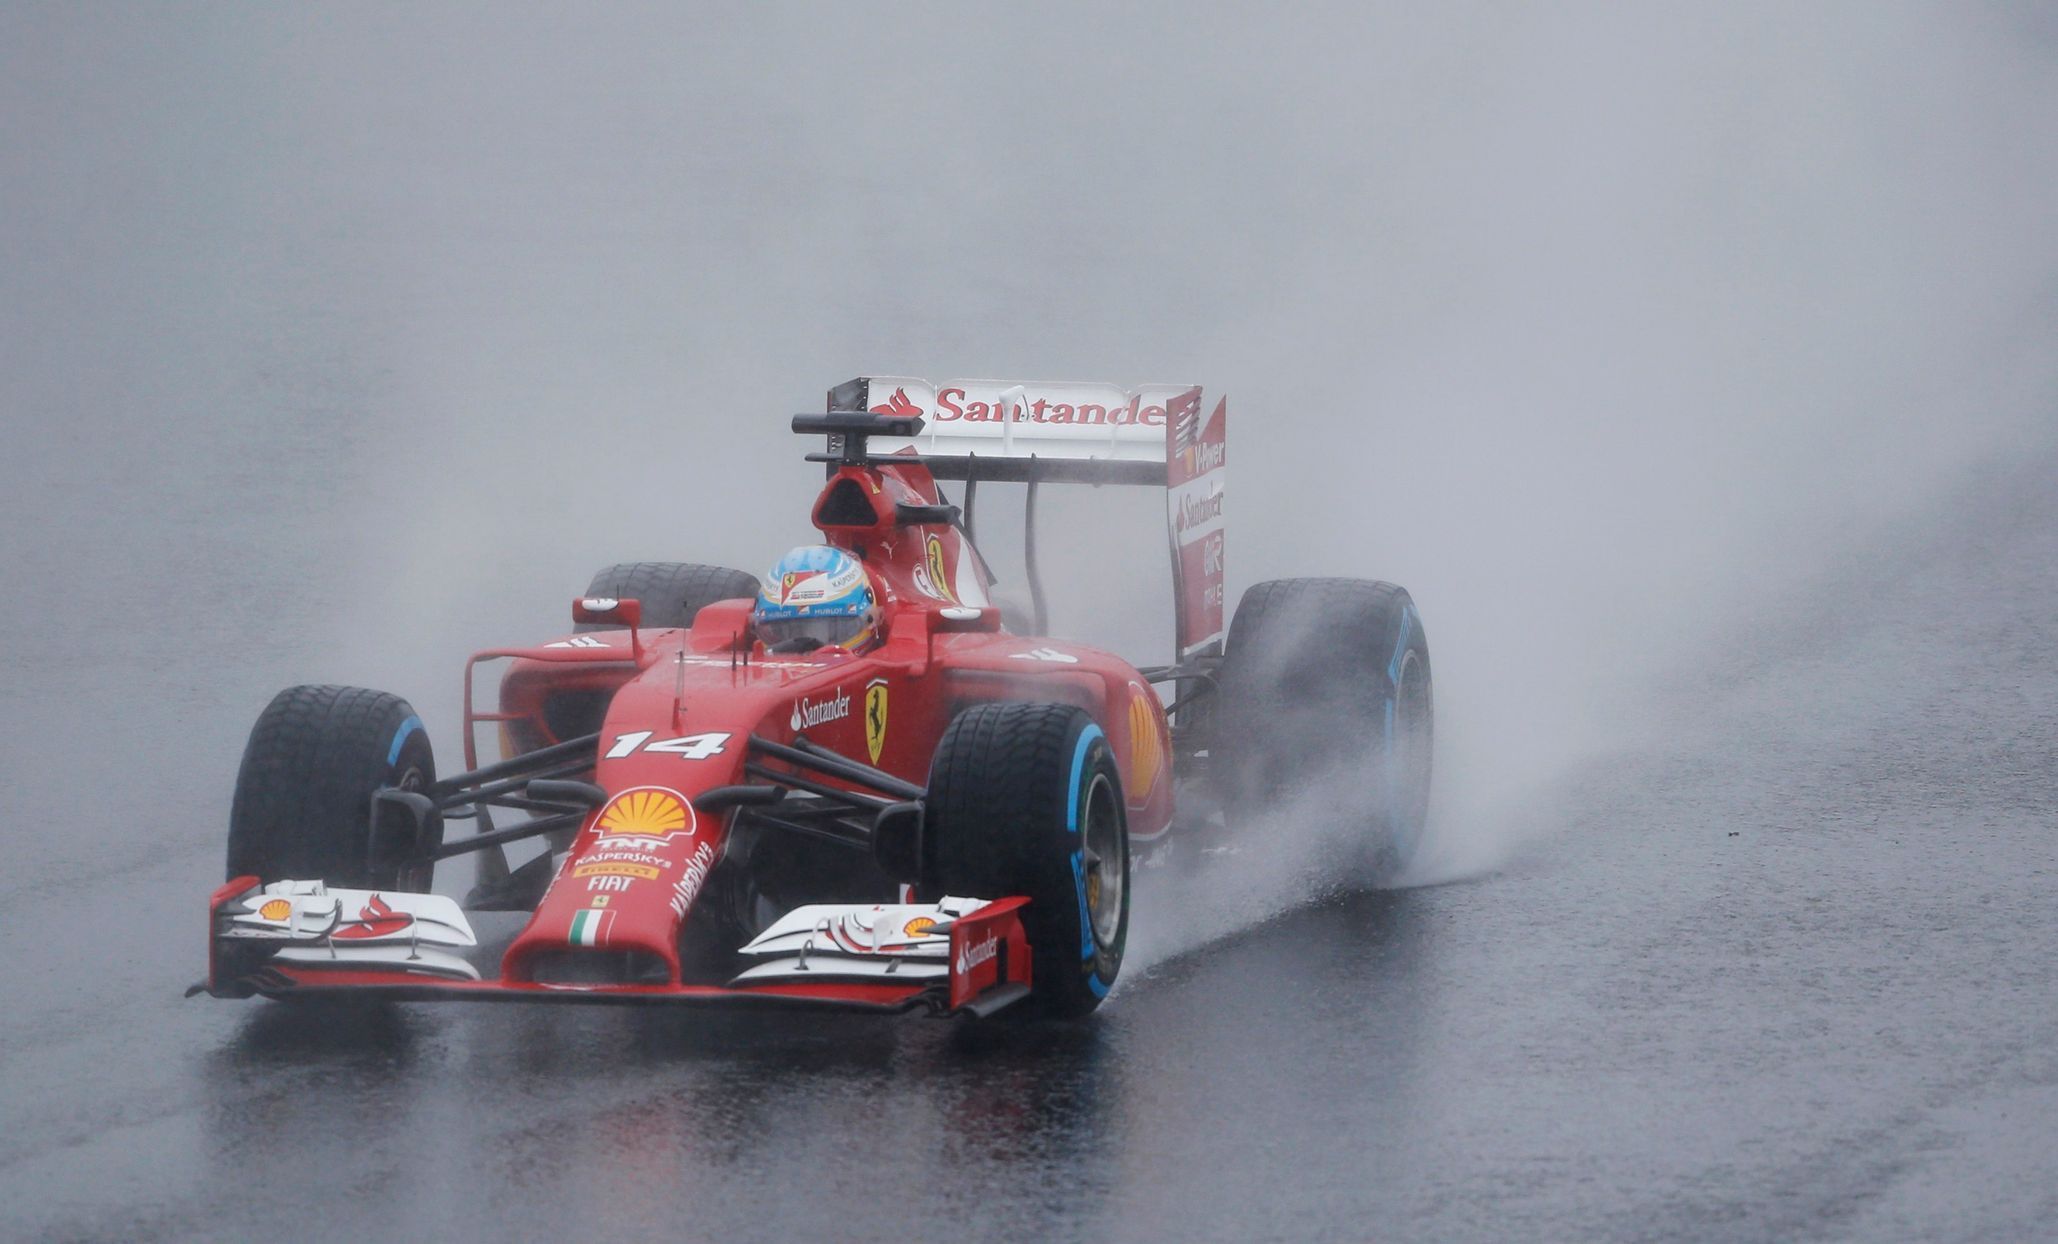 Ferrari Formula One driver Alonso of Spain drives during the Japanese F1 Grand Prix at the Suzuka Circuit